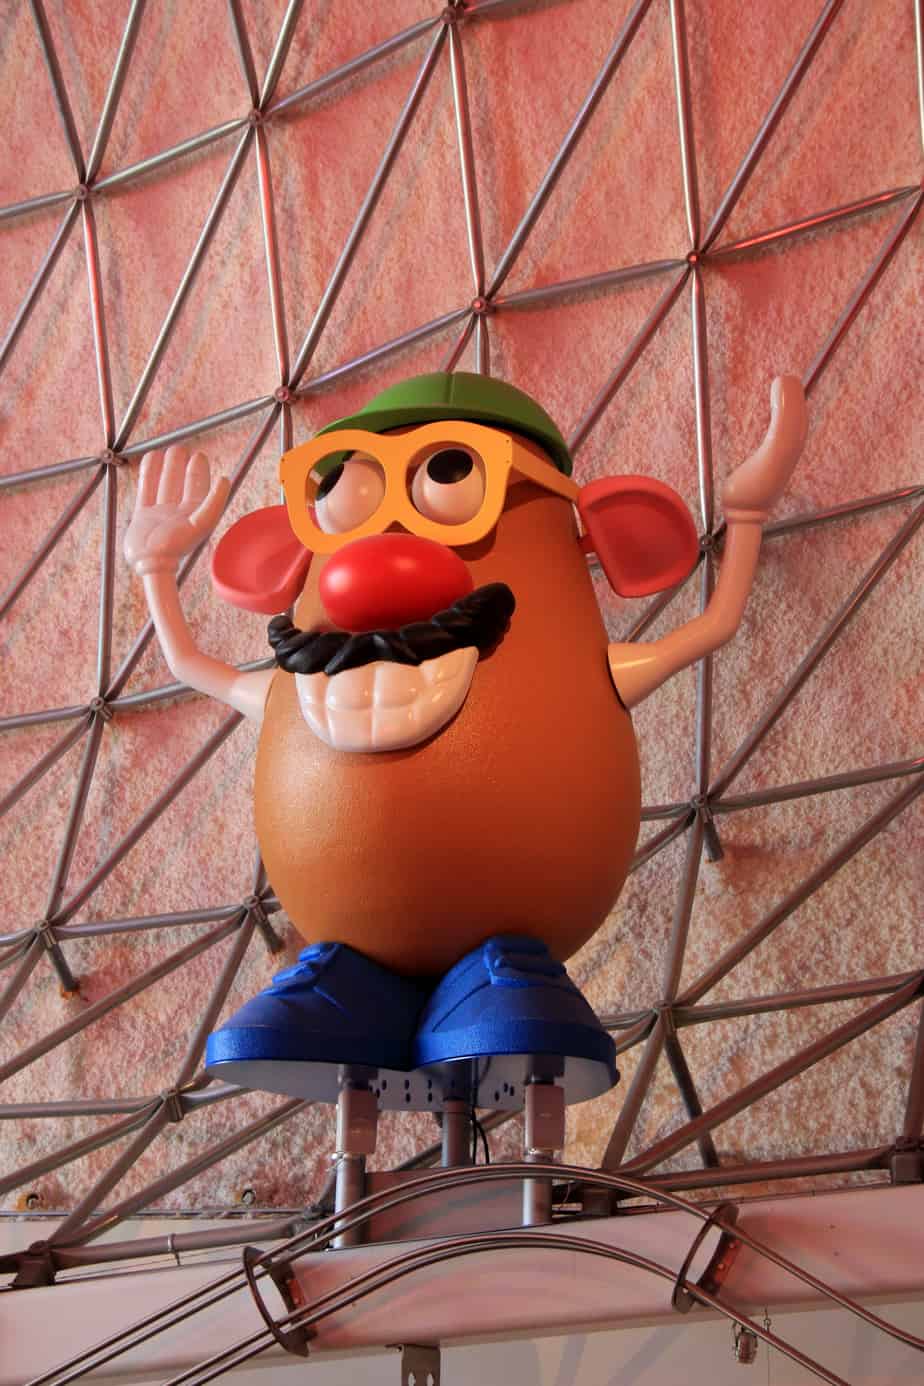 Mr. Potato Head National Museum of Play Rochester